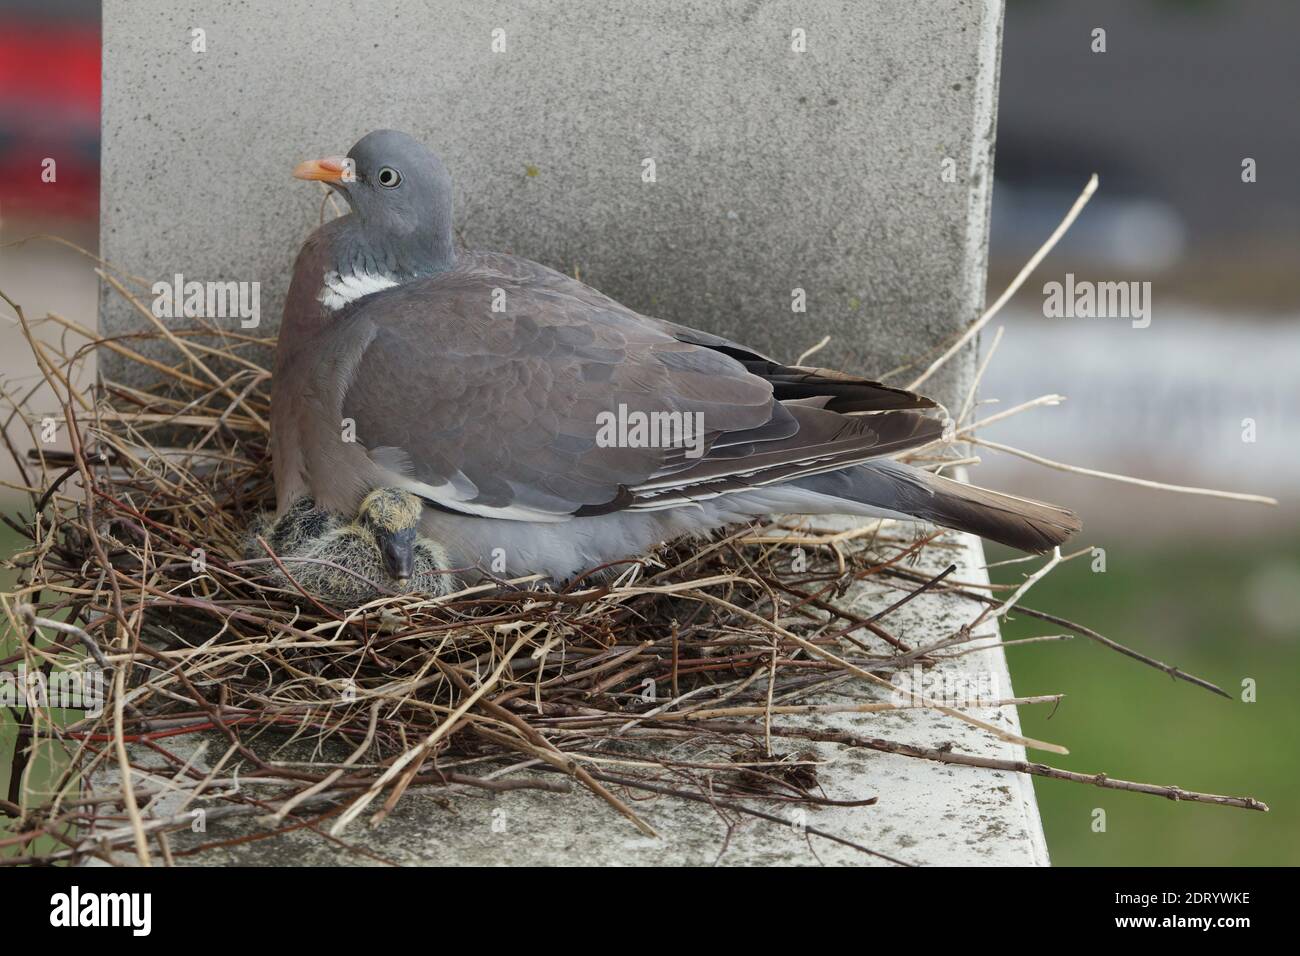 Common wood pigeon (Columba palumbus) tends to its two newly hatched squabs in the nest on the ledge of a dwelling house in Prague, Czech Republic. The nest is pictured approximately one week after the squabs hatched out. Stock Photo